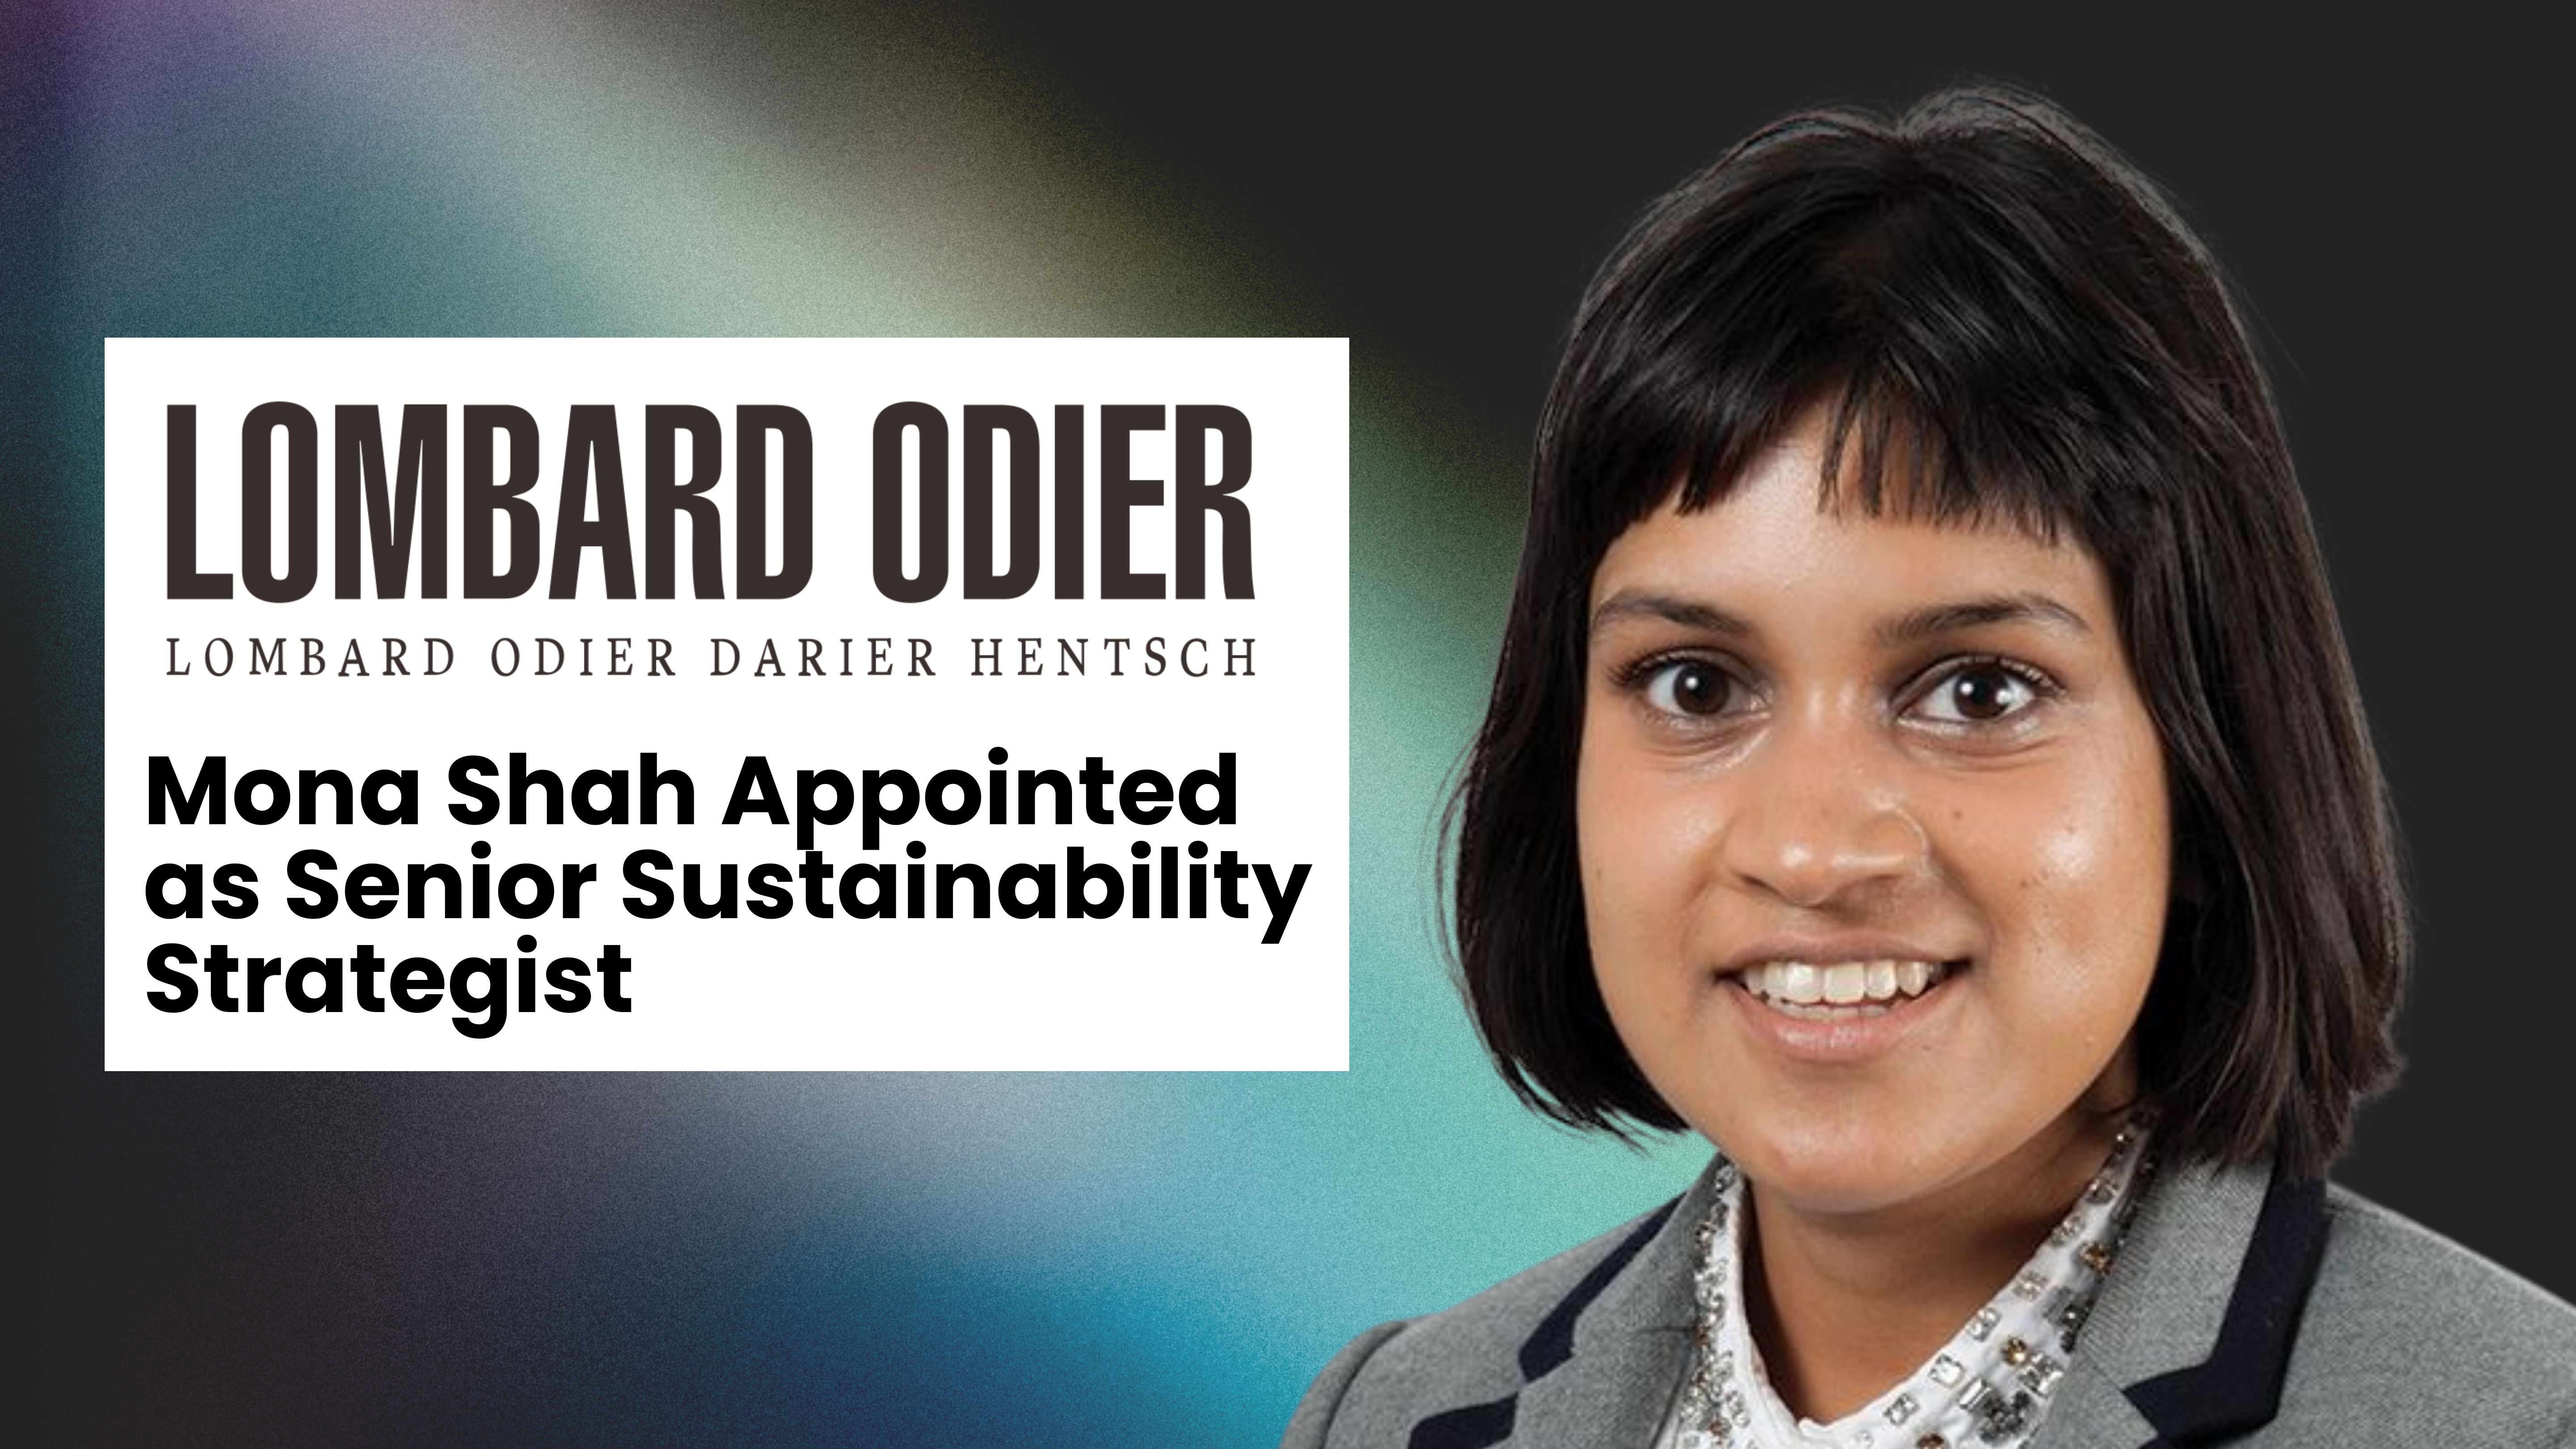 Mona Shah Appointed as Senior Sustainability Strategist